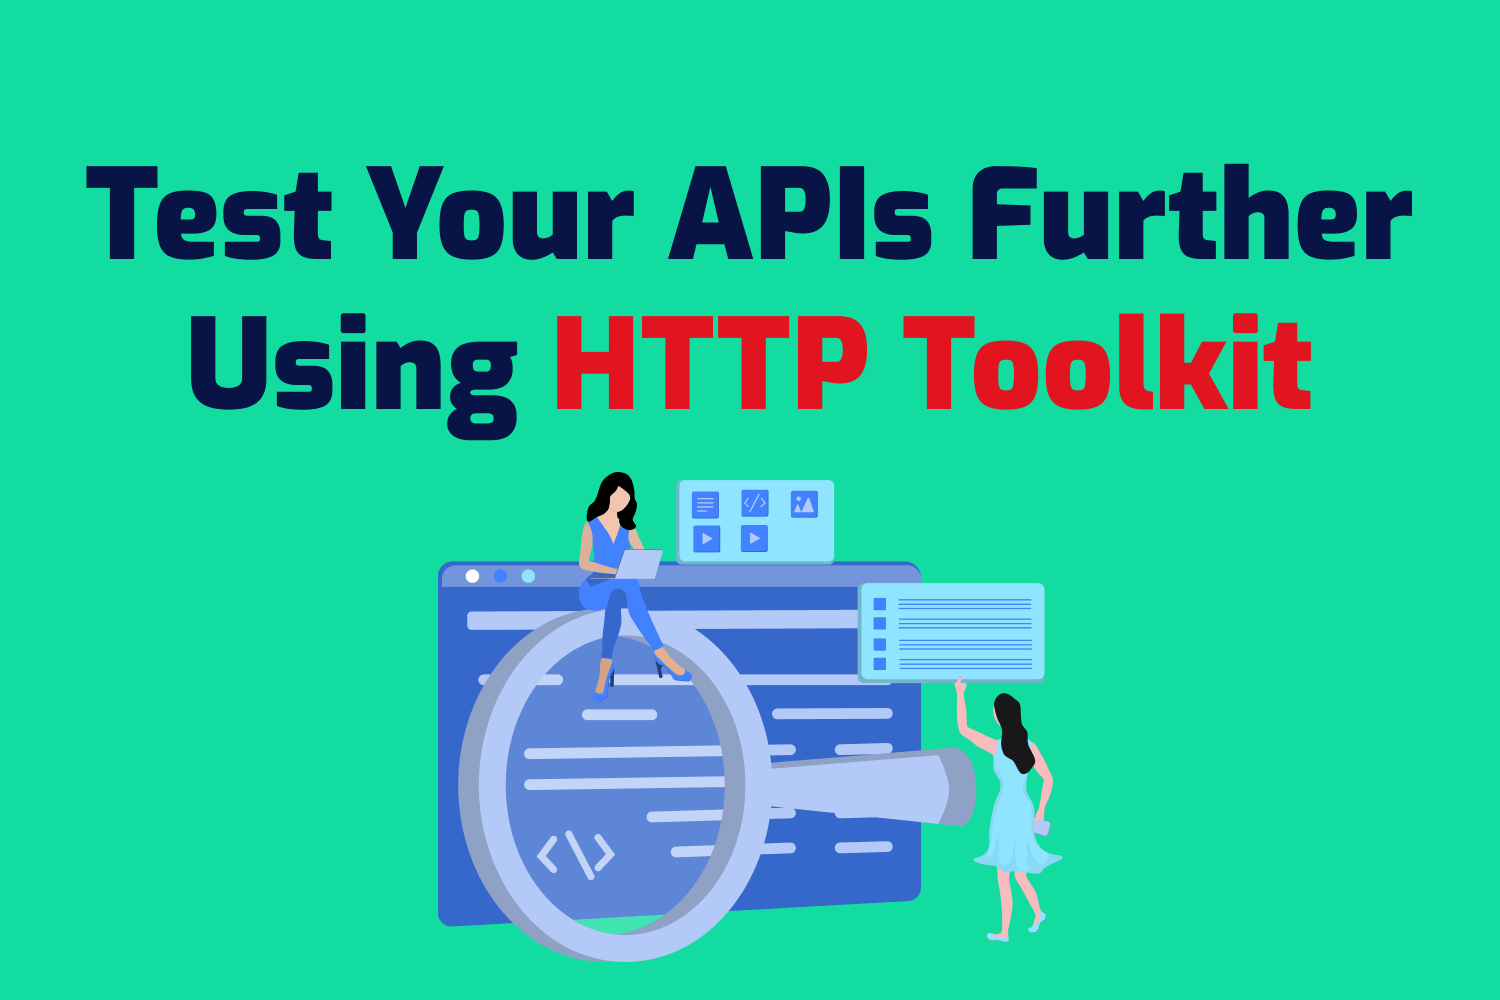 Test Your APIs Further Using HTTP Toolkit